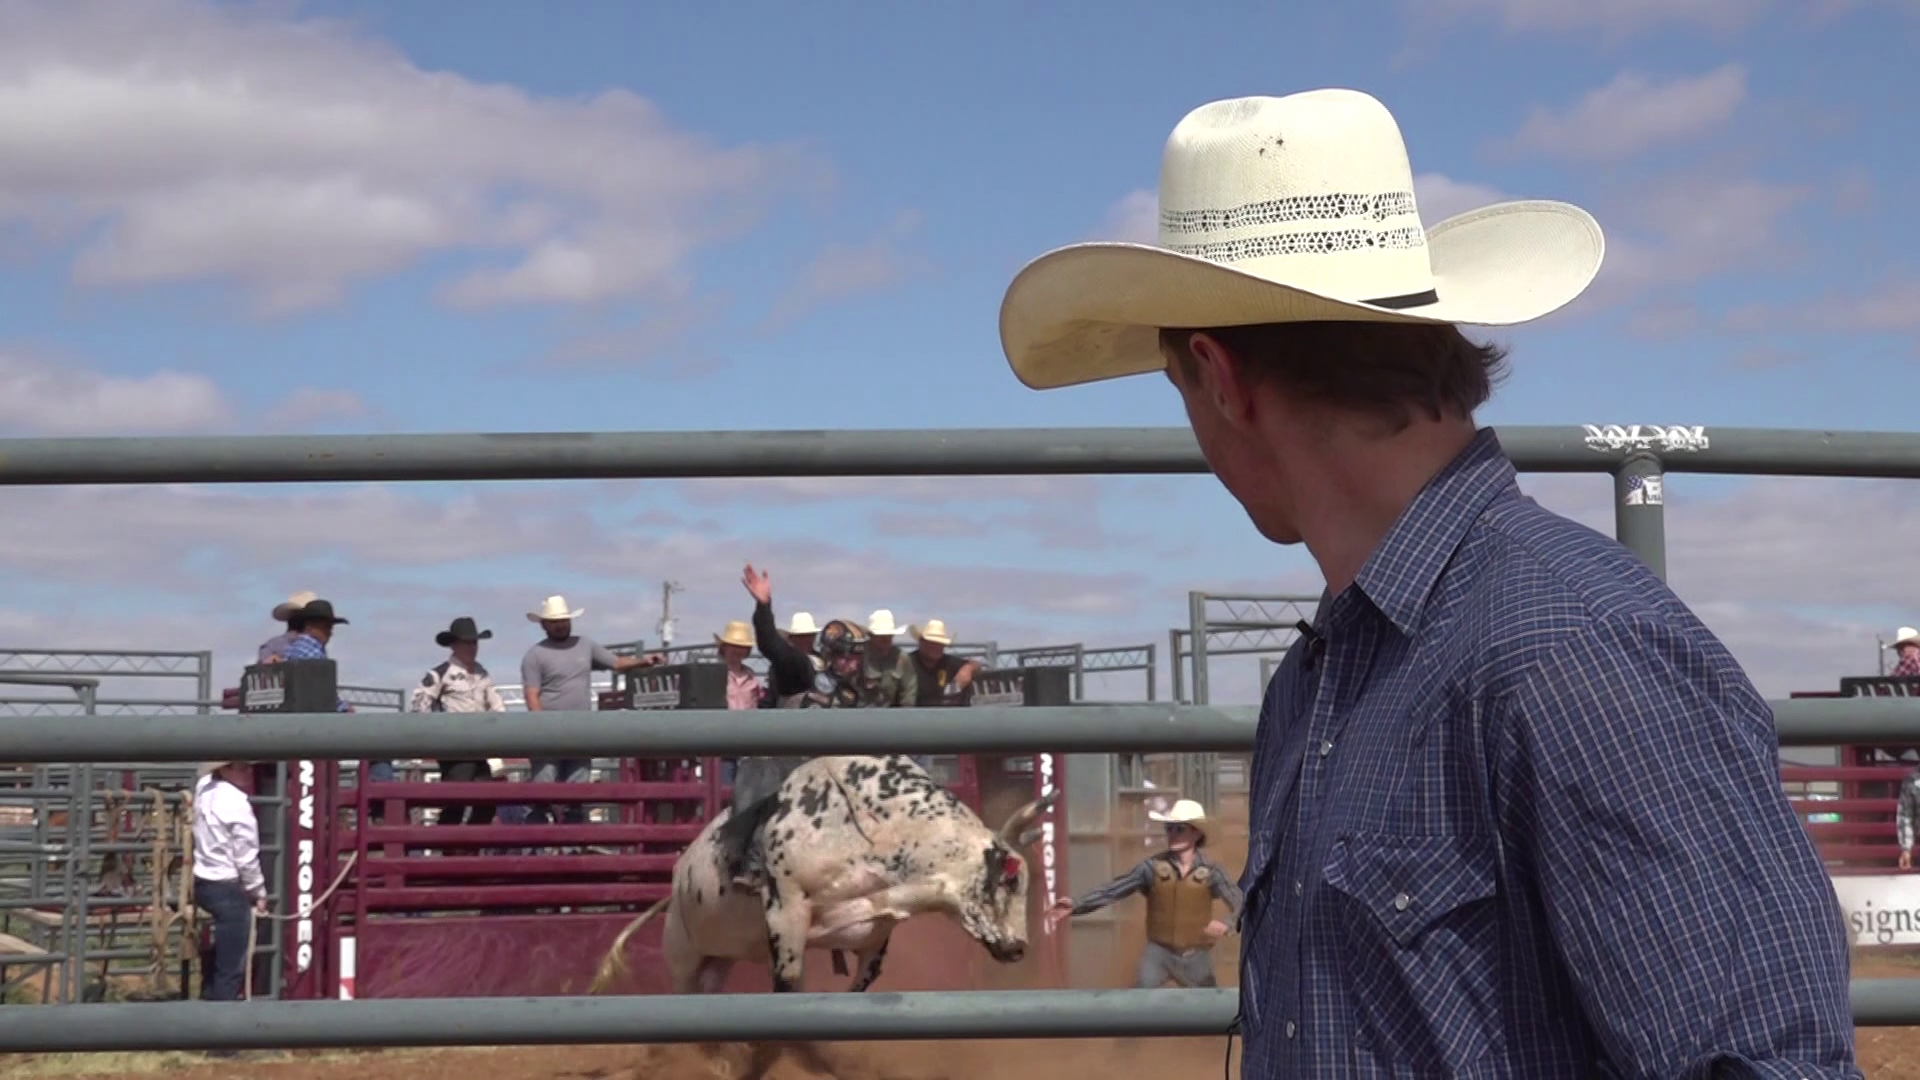 Rodeo isn’t as big in Australia as it is in the U.S. That’s why these bull riders decided to move more than 9,000 miles, or more than 14,000 kilometers, away.